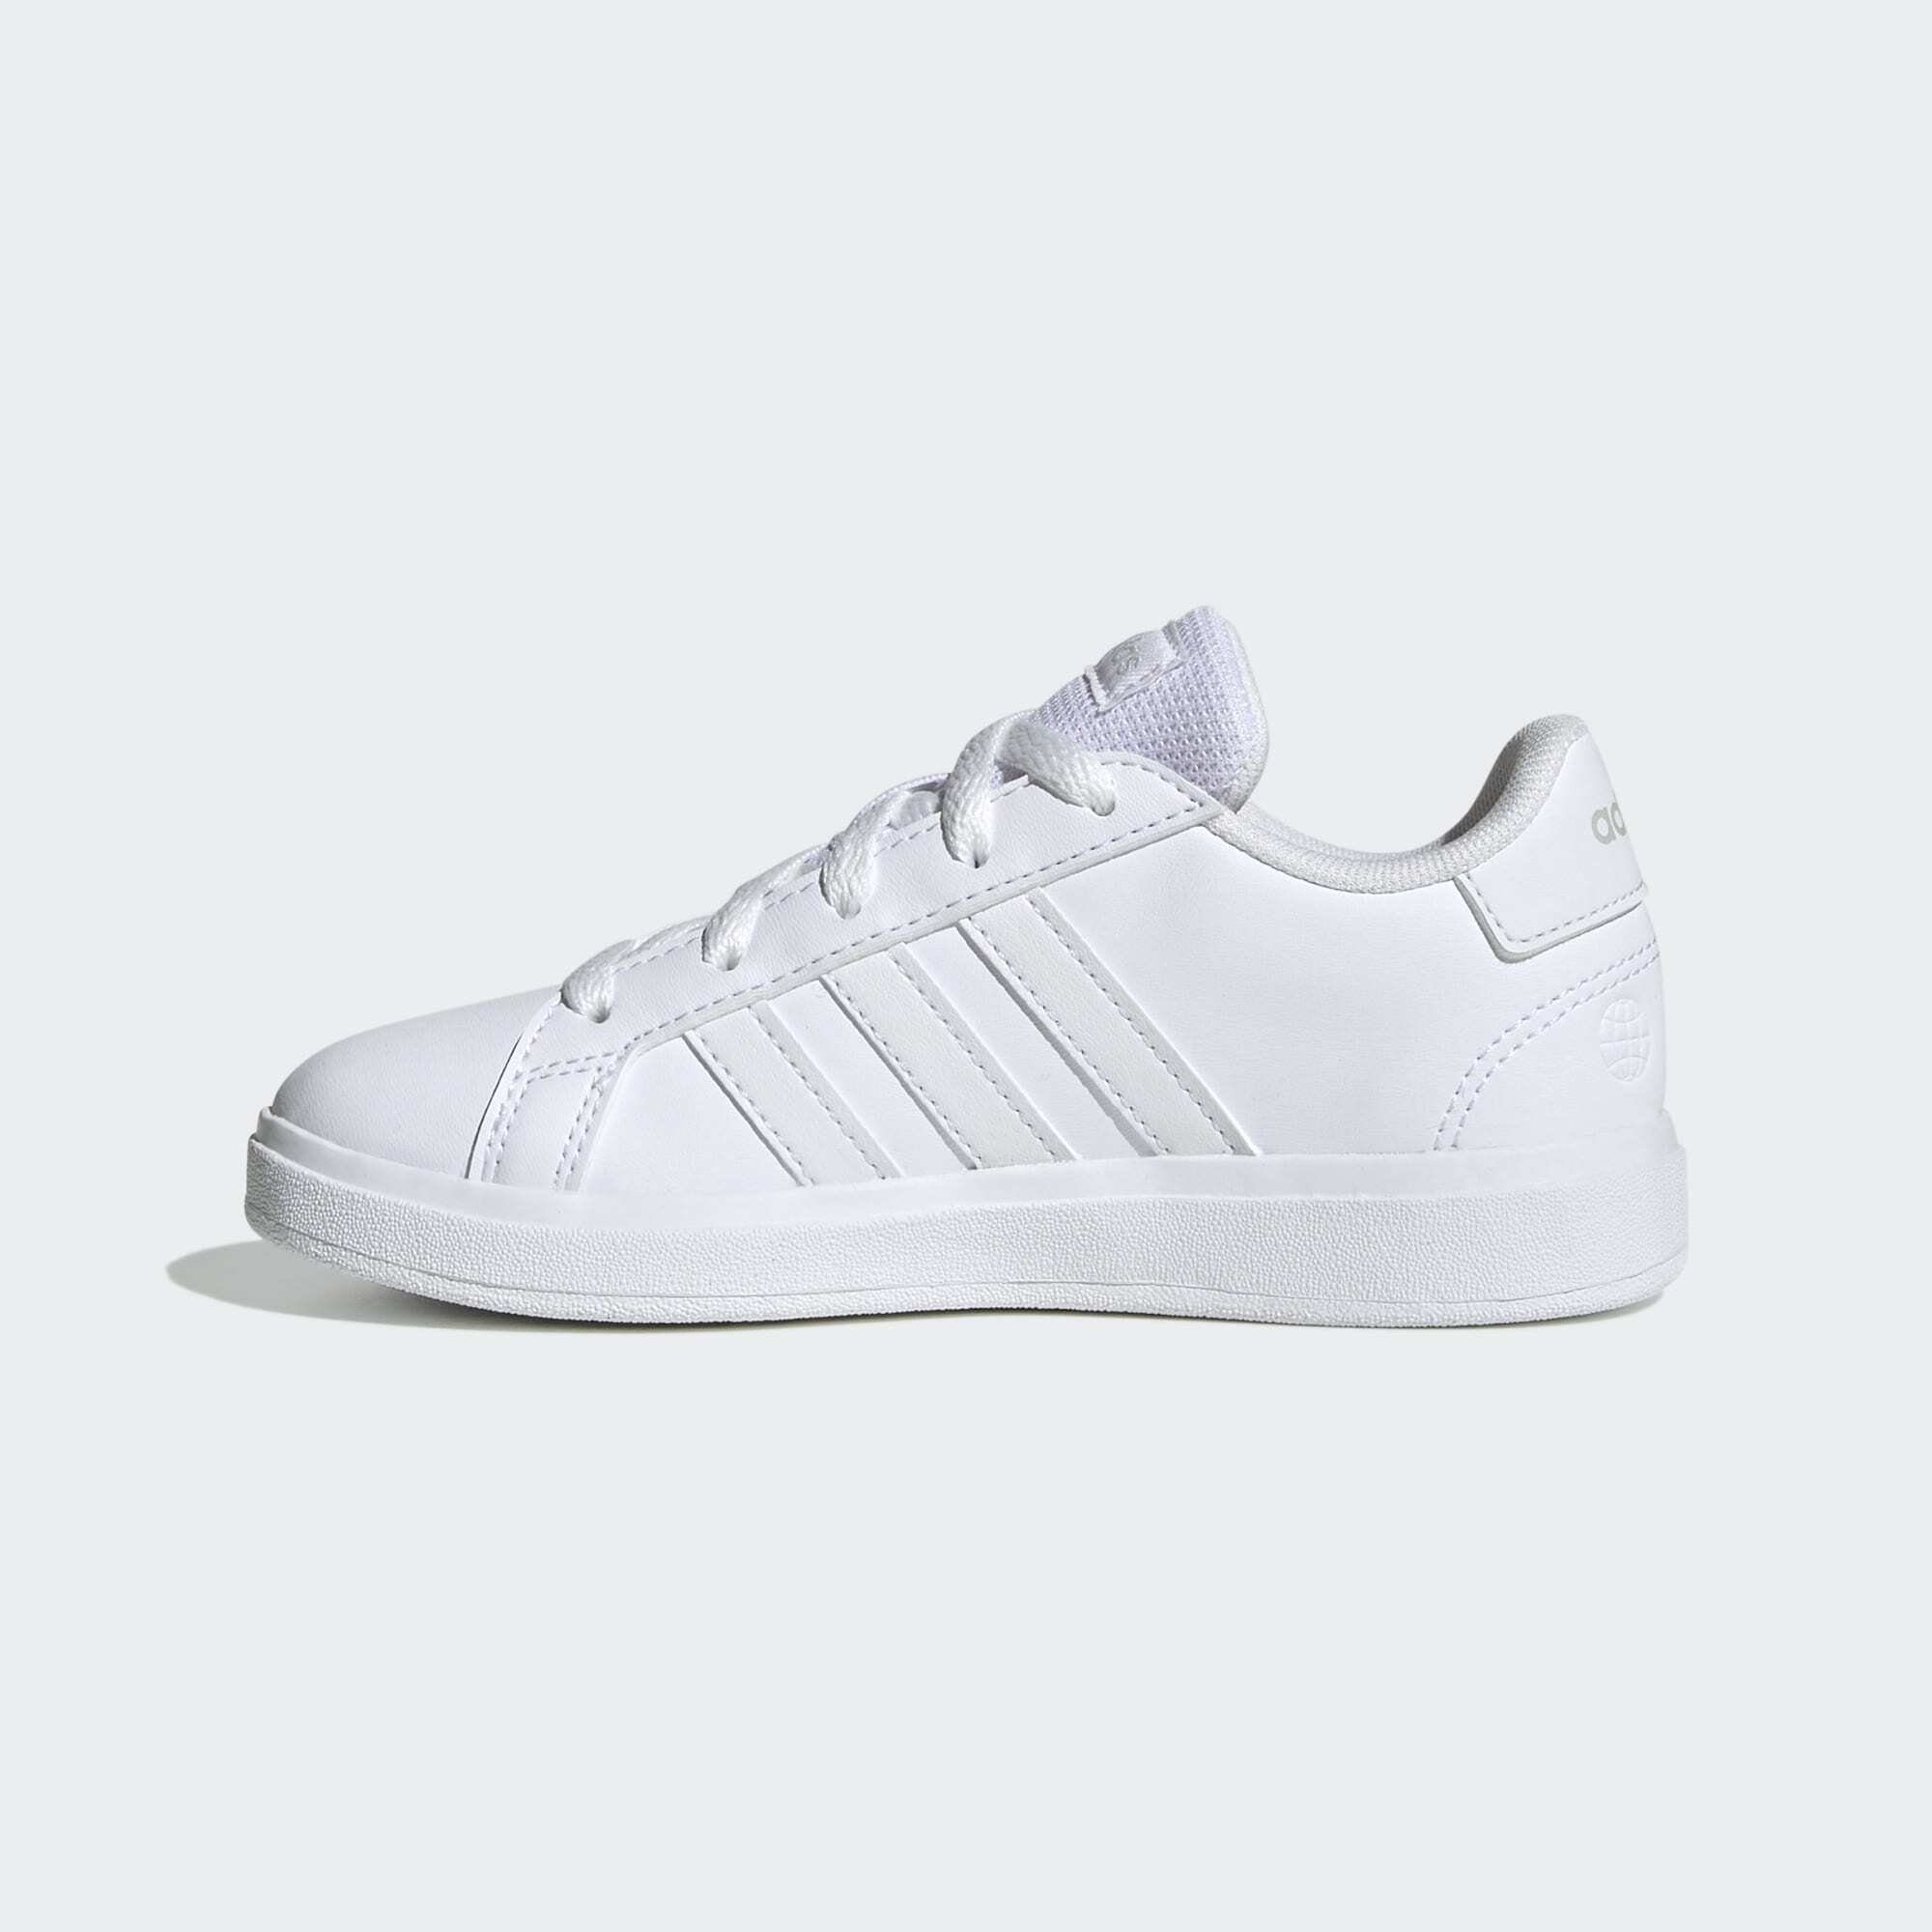 Cloud LIFESTYLE GRAND SCHUH adidas Cloud White COURT / Grey TENNIS Sportswear LACE-UP One Sneaker / White